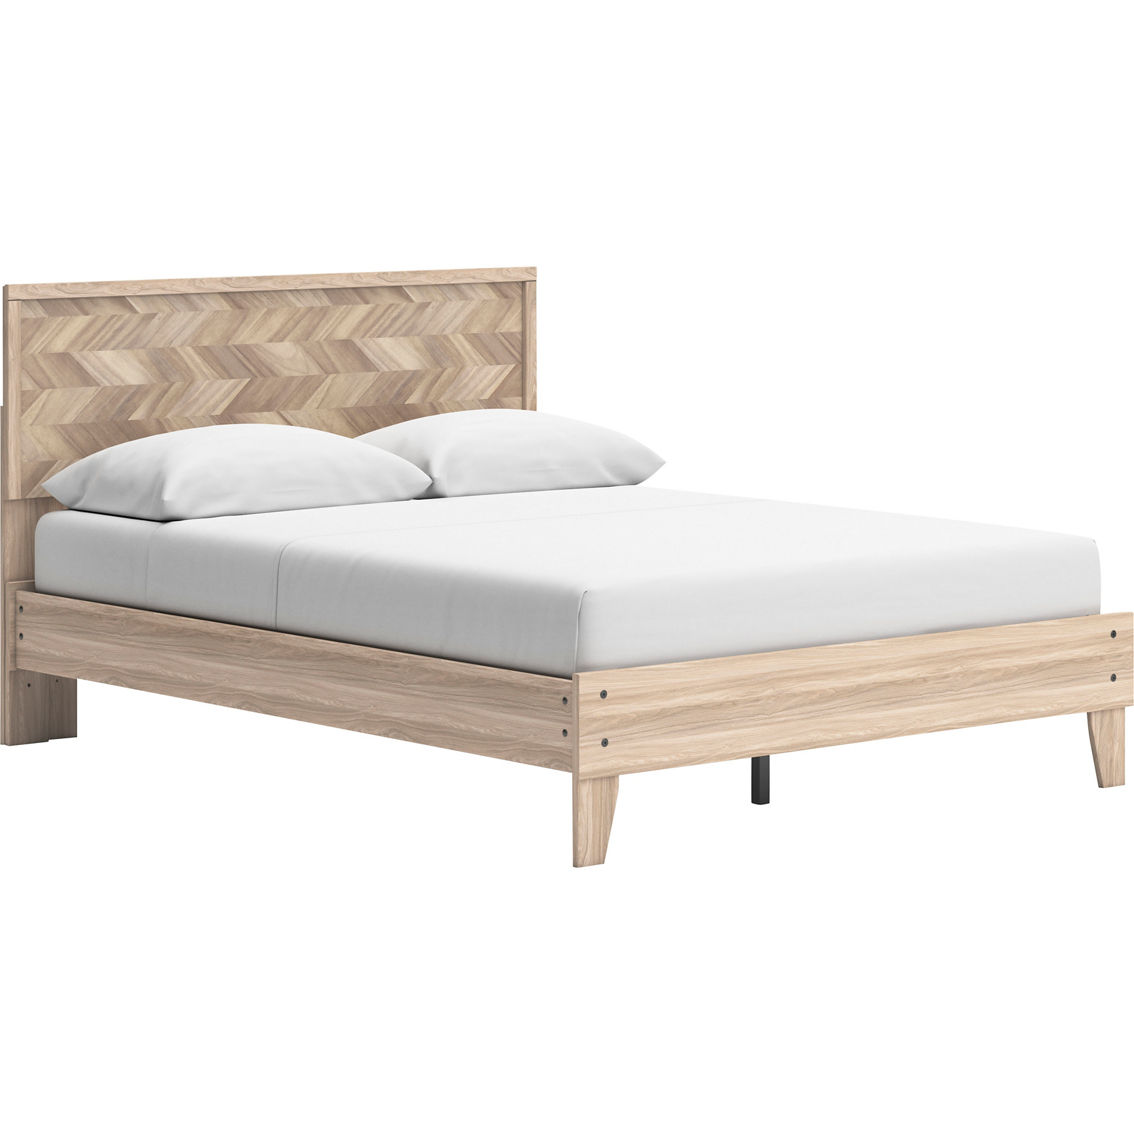 Signature Design by Ashley Battelle Ready-to-Assemble Panel Bed - Image 5 of 7